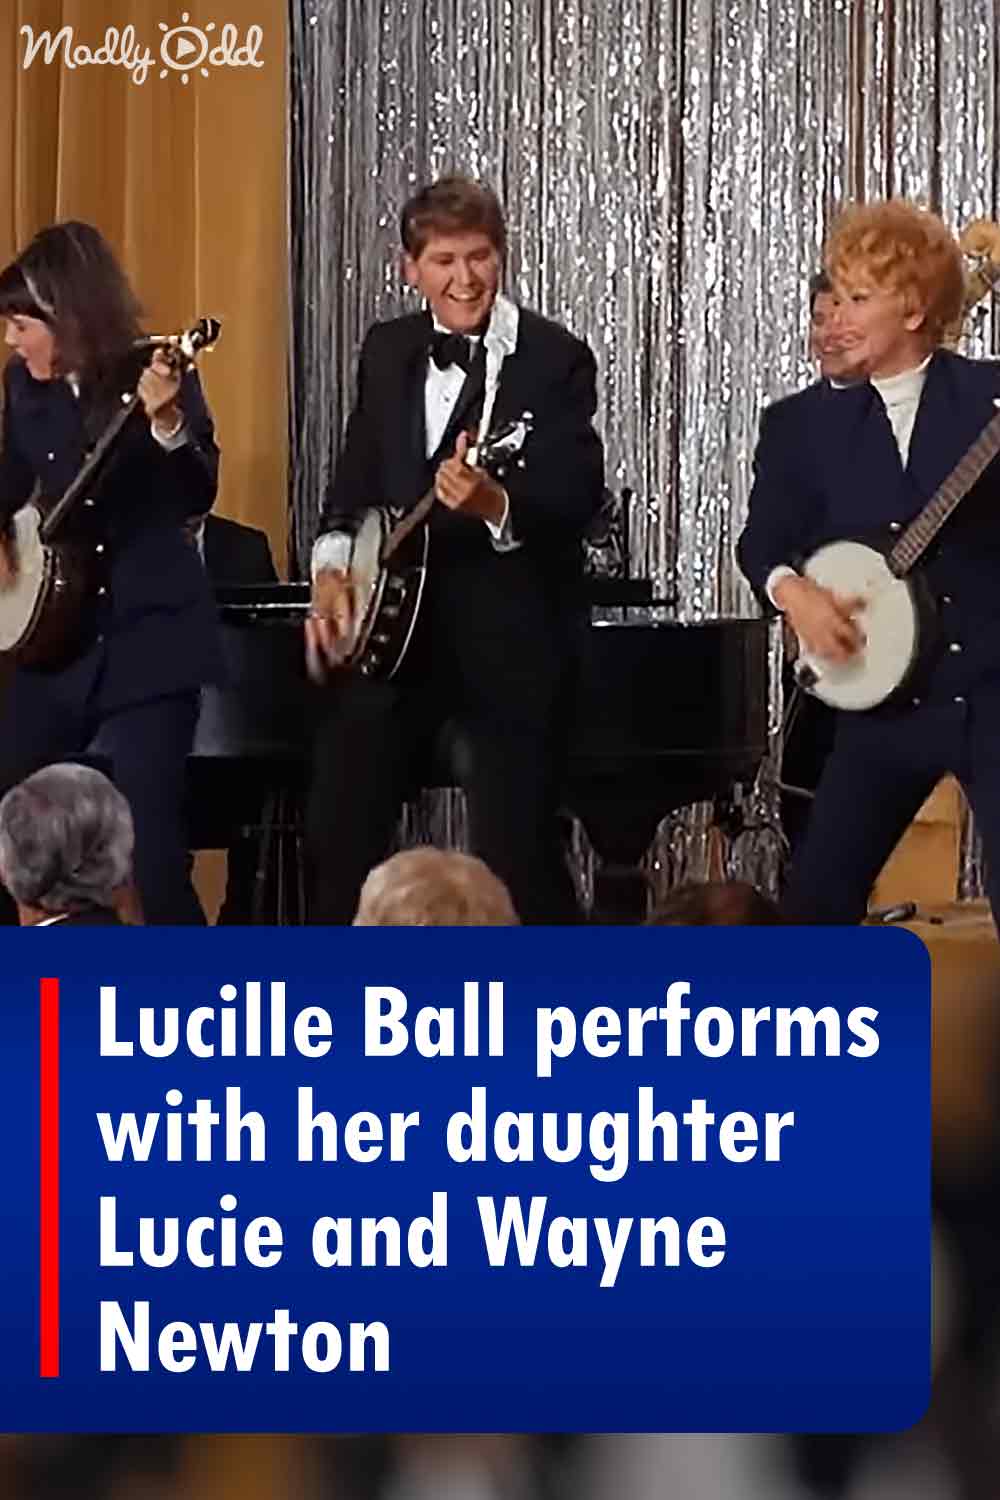 Lucille Ball performs with her daughter Lucie and Wayne Newton